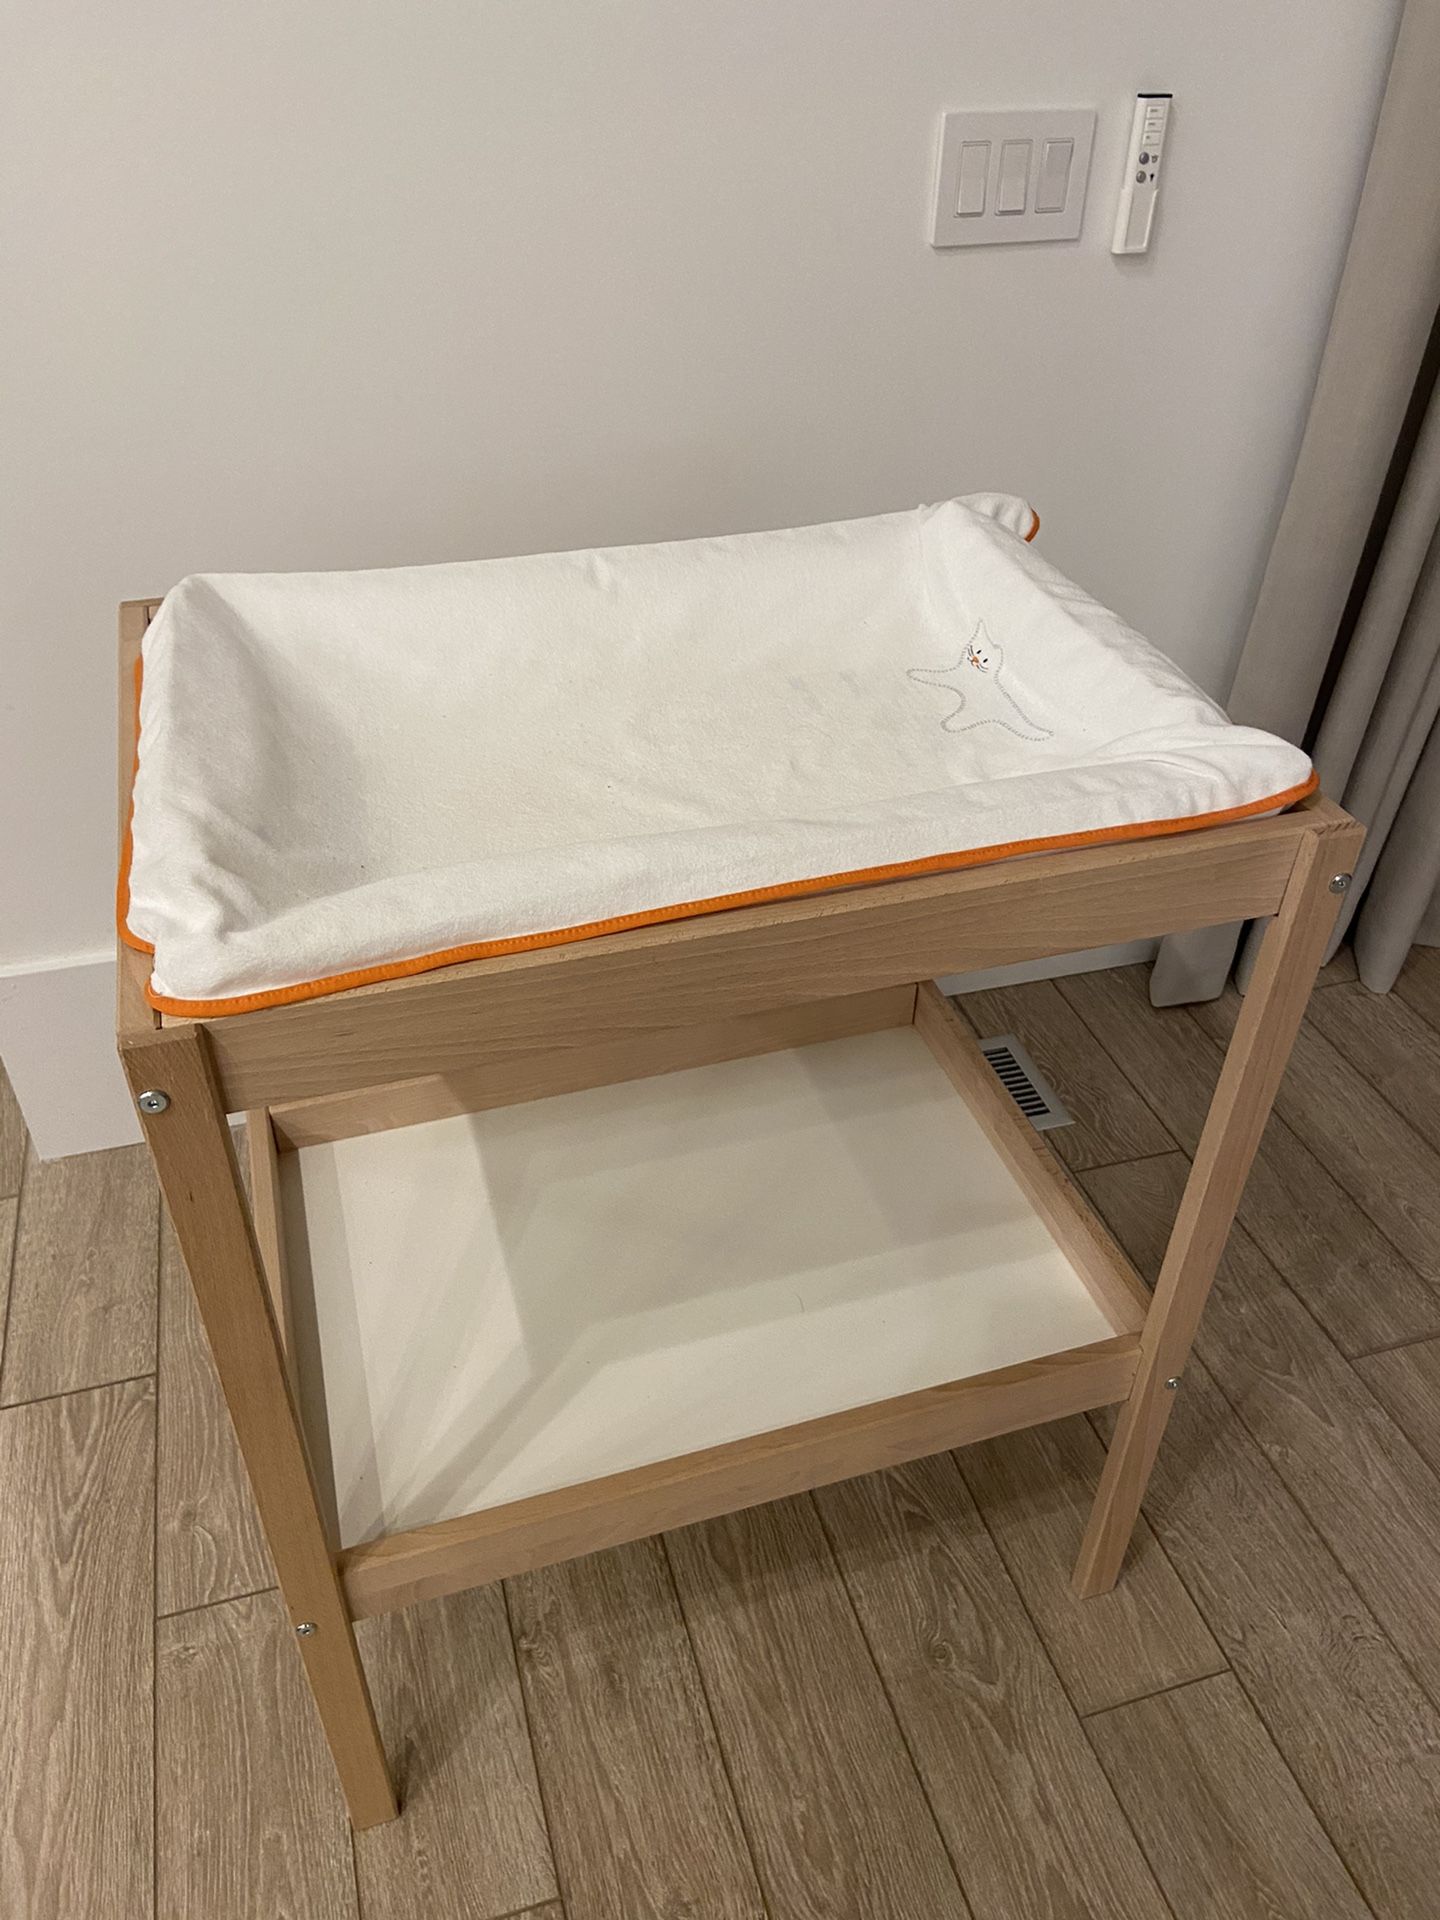 IKEA changing table with cushion+cover